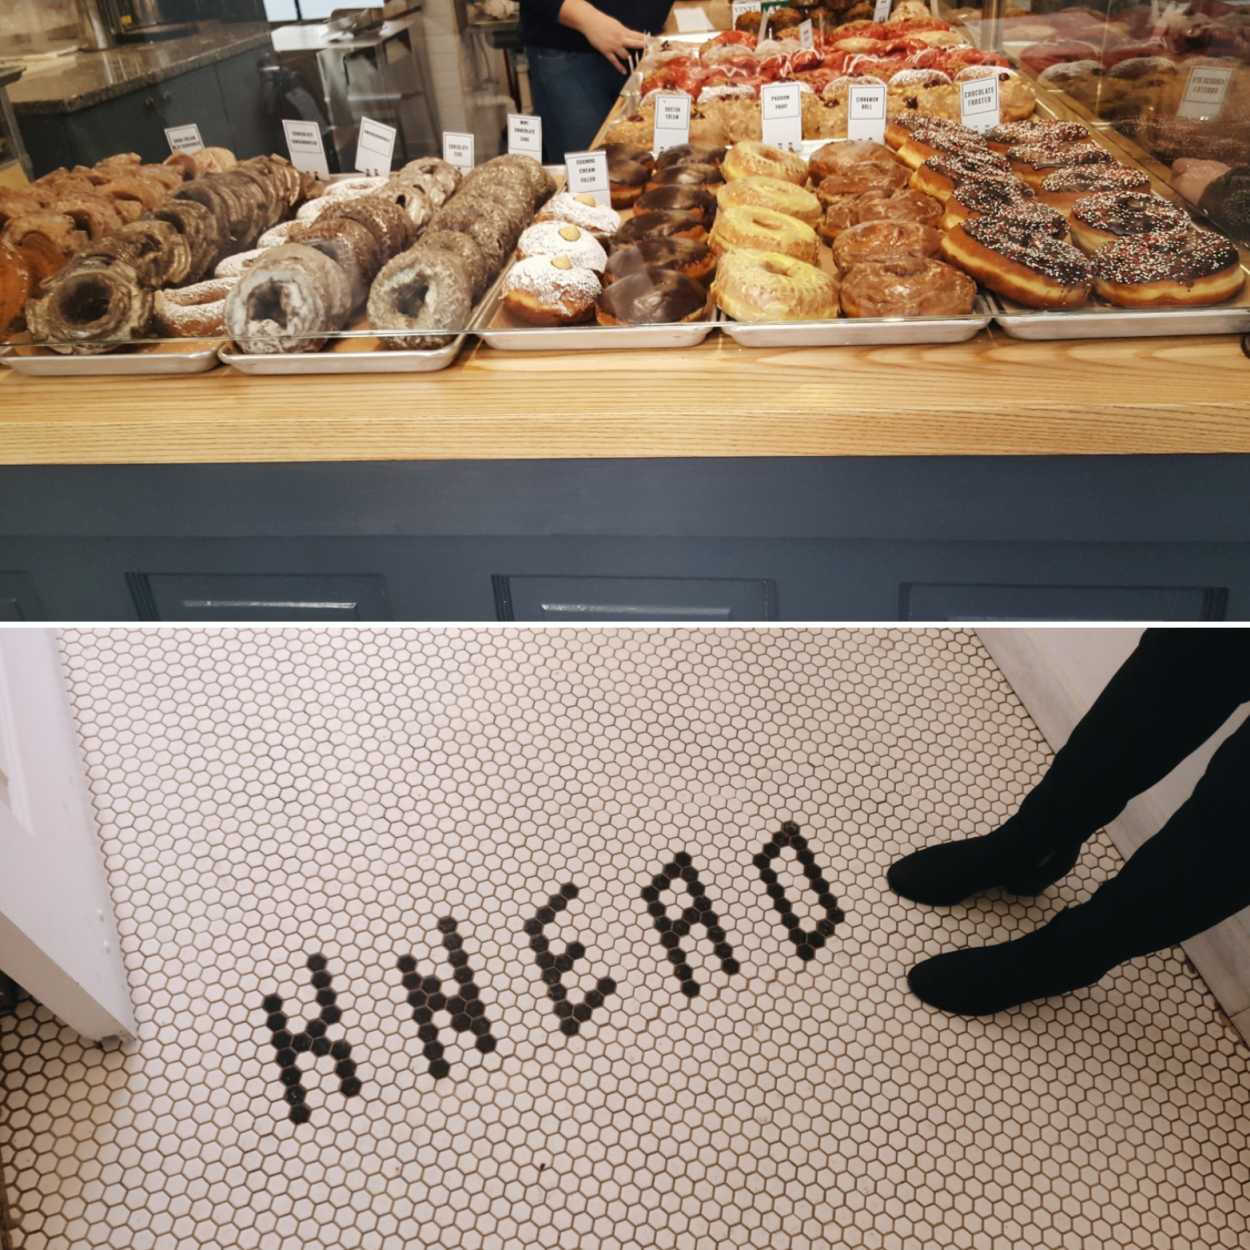 Doughnuts from Knead Doughnuts, and penny tile floor that spells out "Knead"